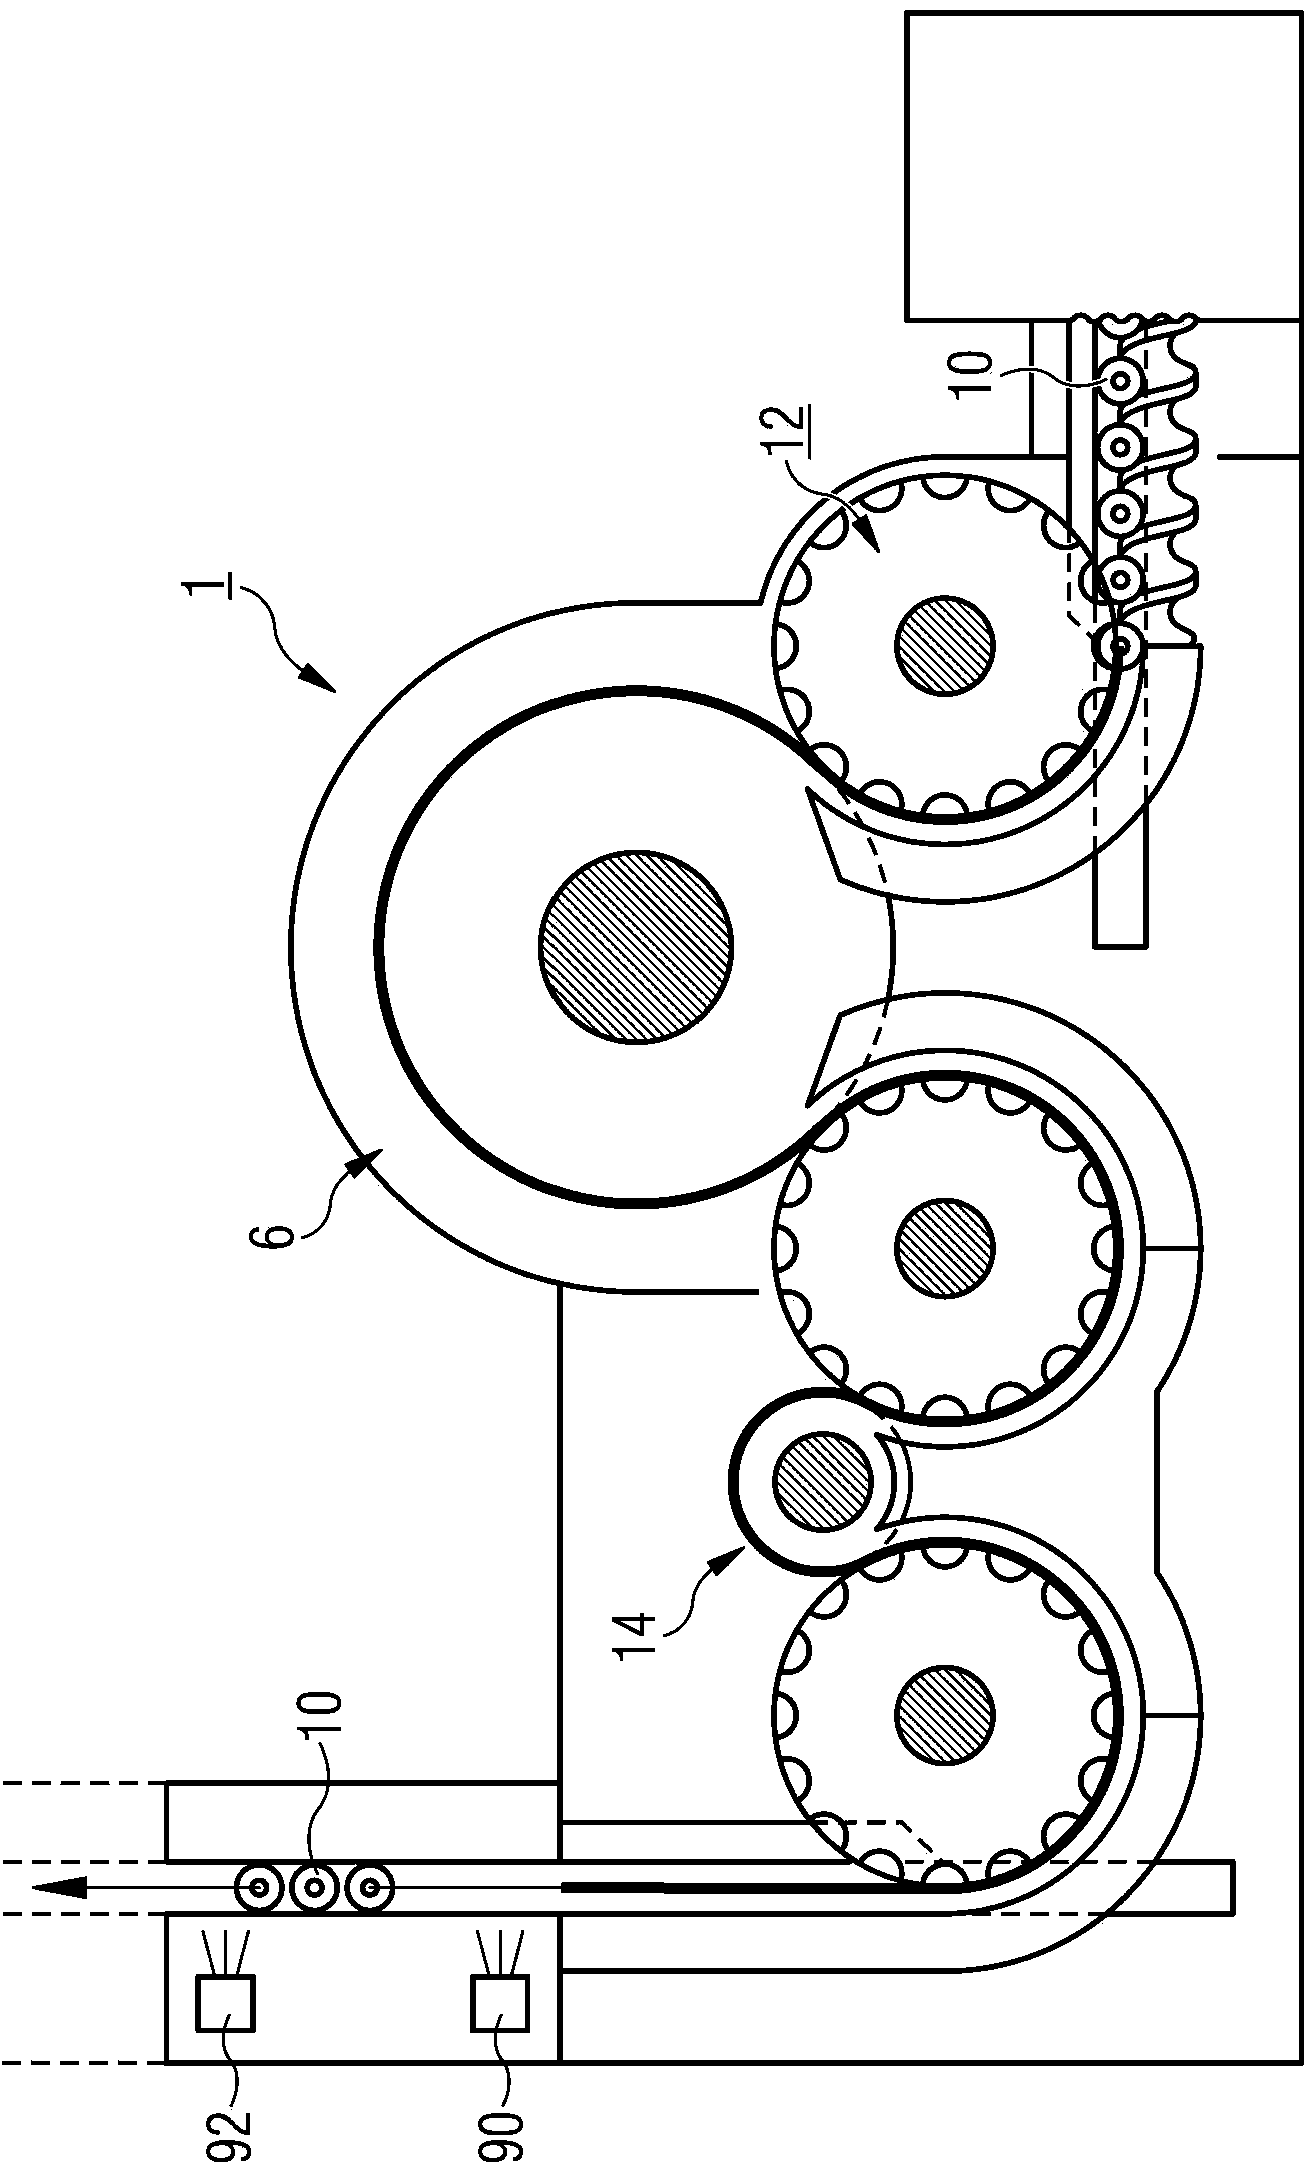 Method and device for filling containers with liquid material